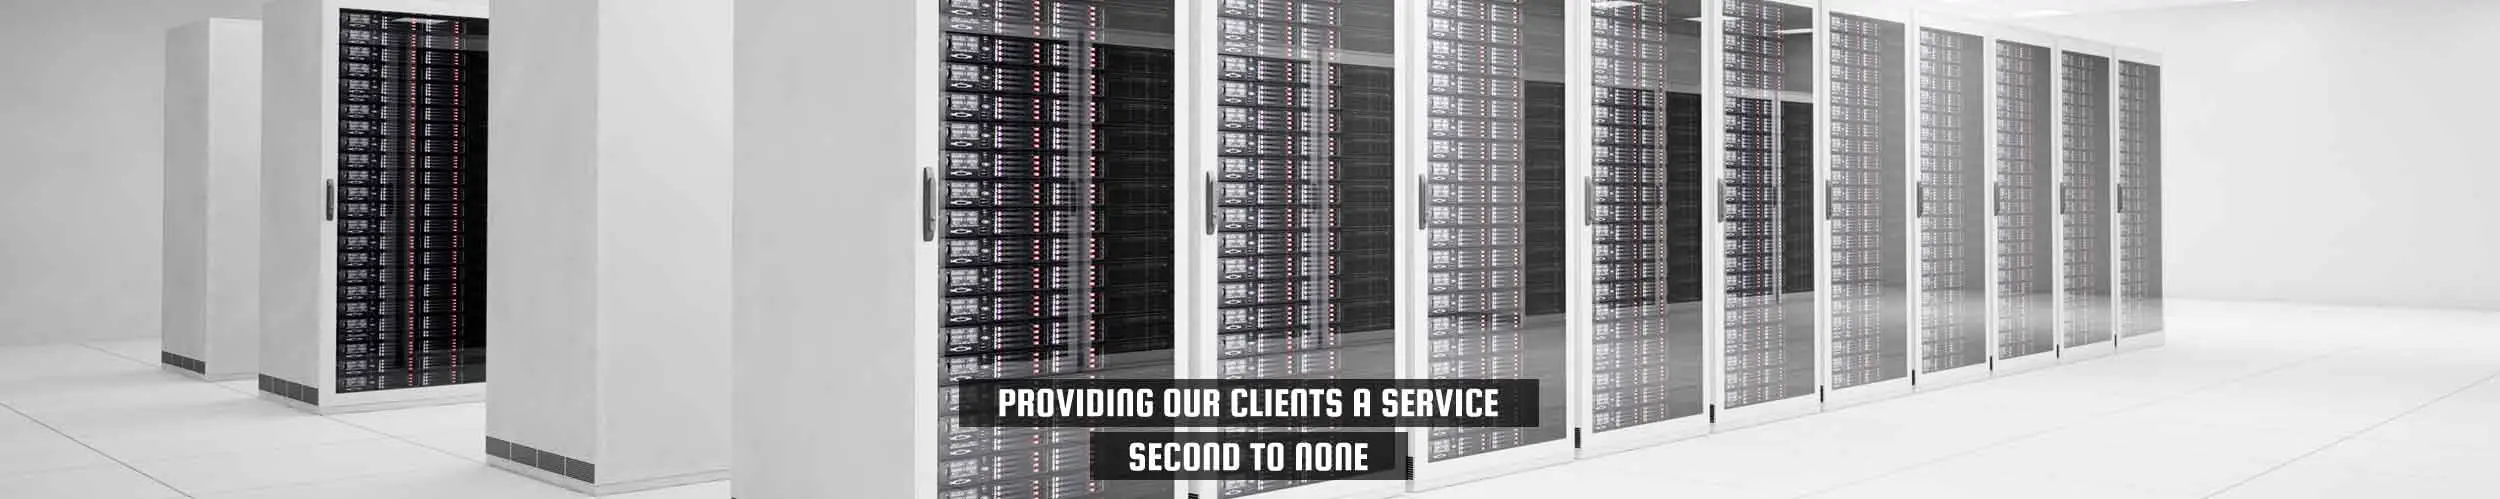 52Degrees Terms of Service | "providing our clients a service second to none" | Telecom Solutions in Norwich